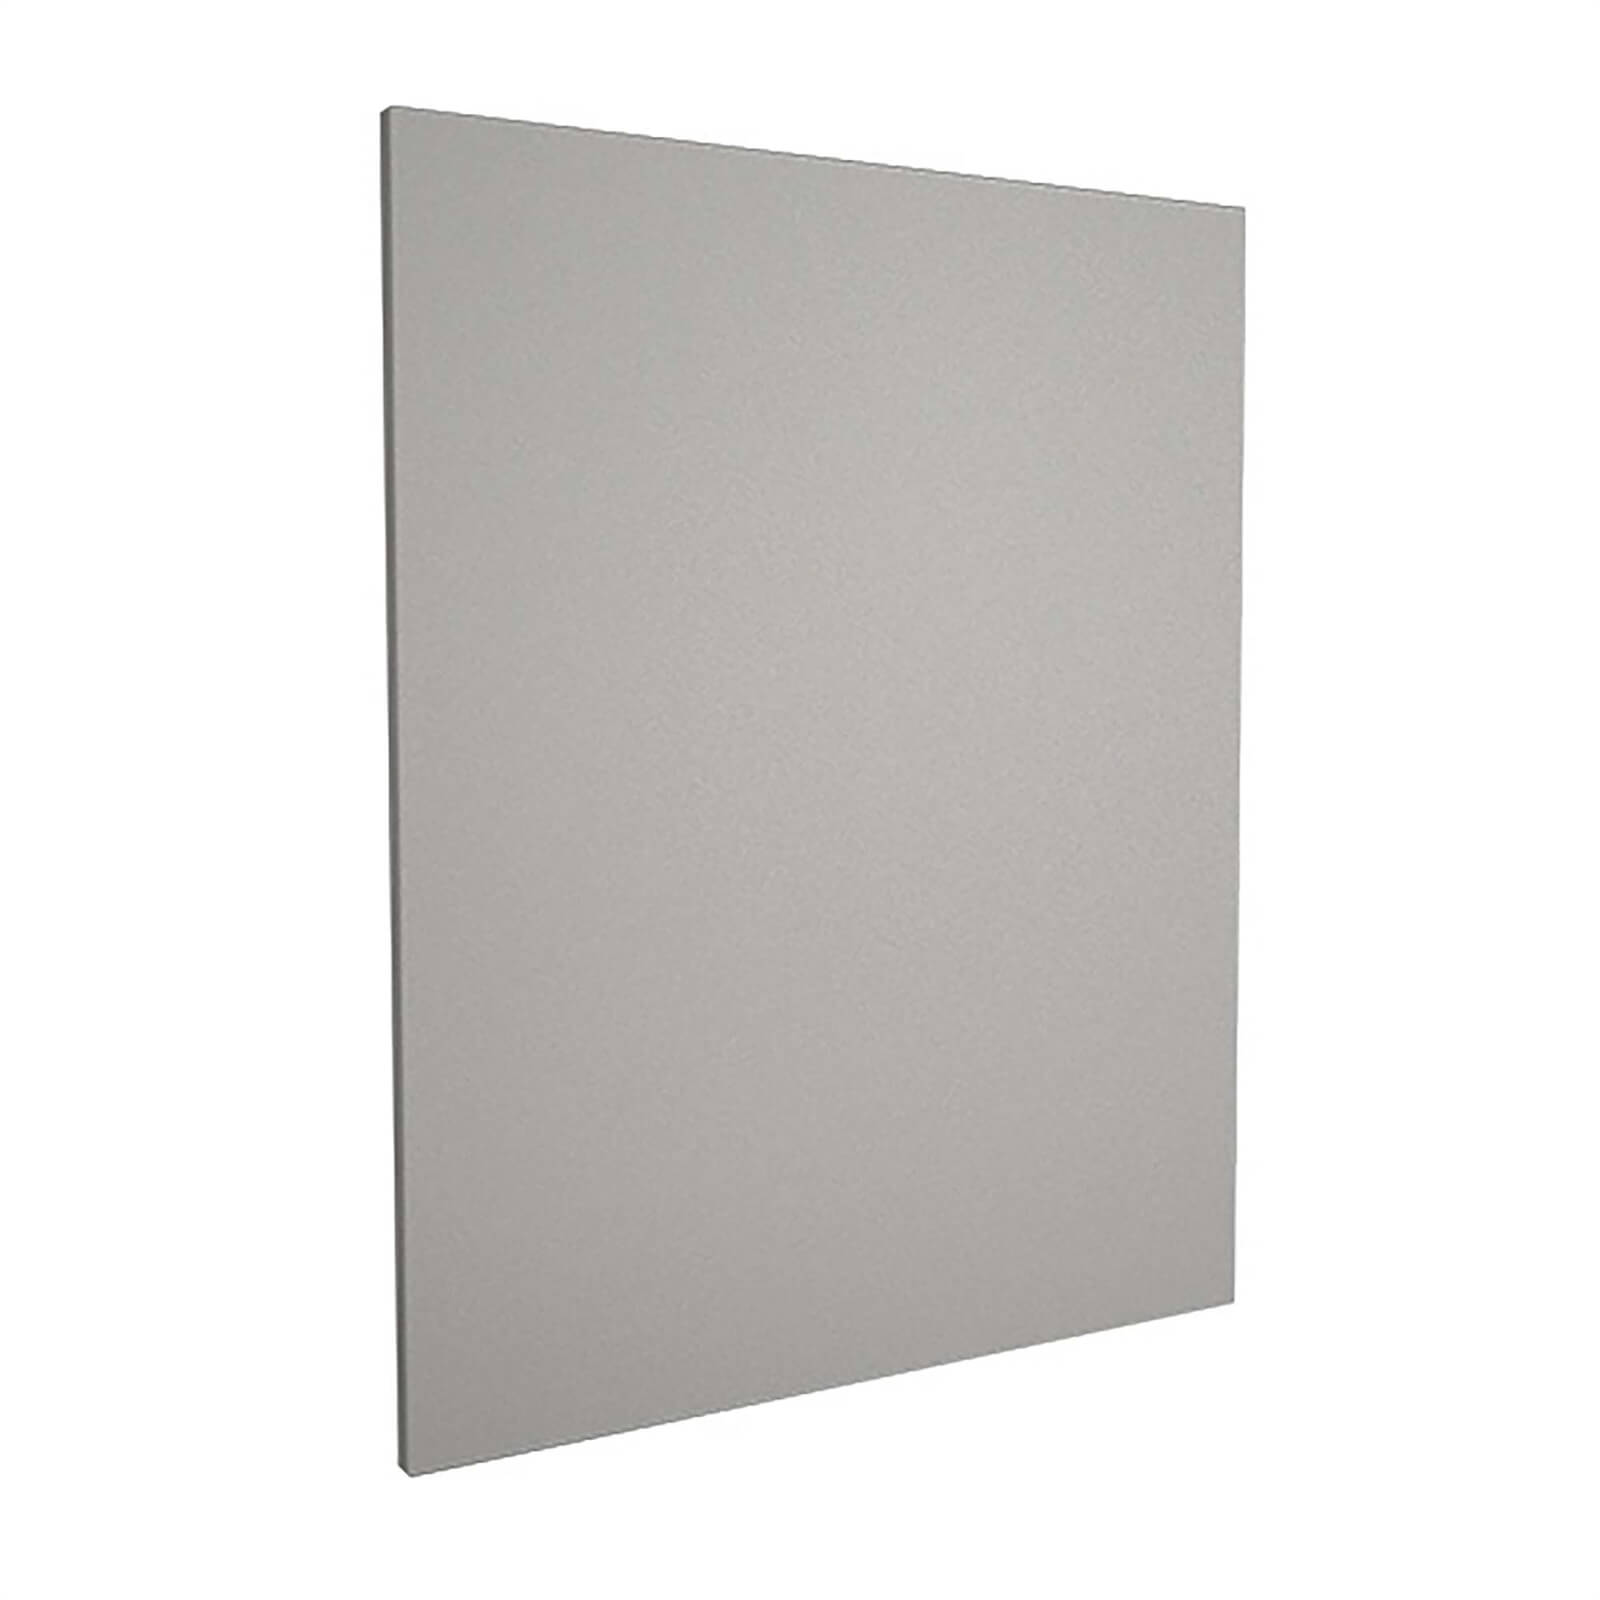 Base Replacement End Panels - Pair for High Gloss Slab Grey or Handleless Grey Gloss